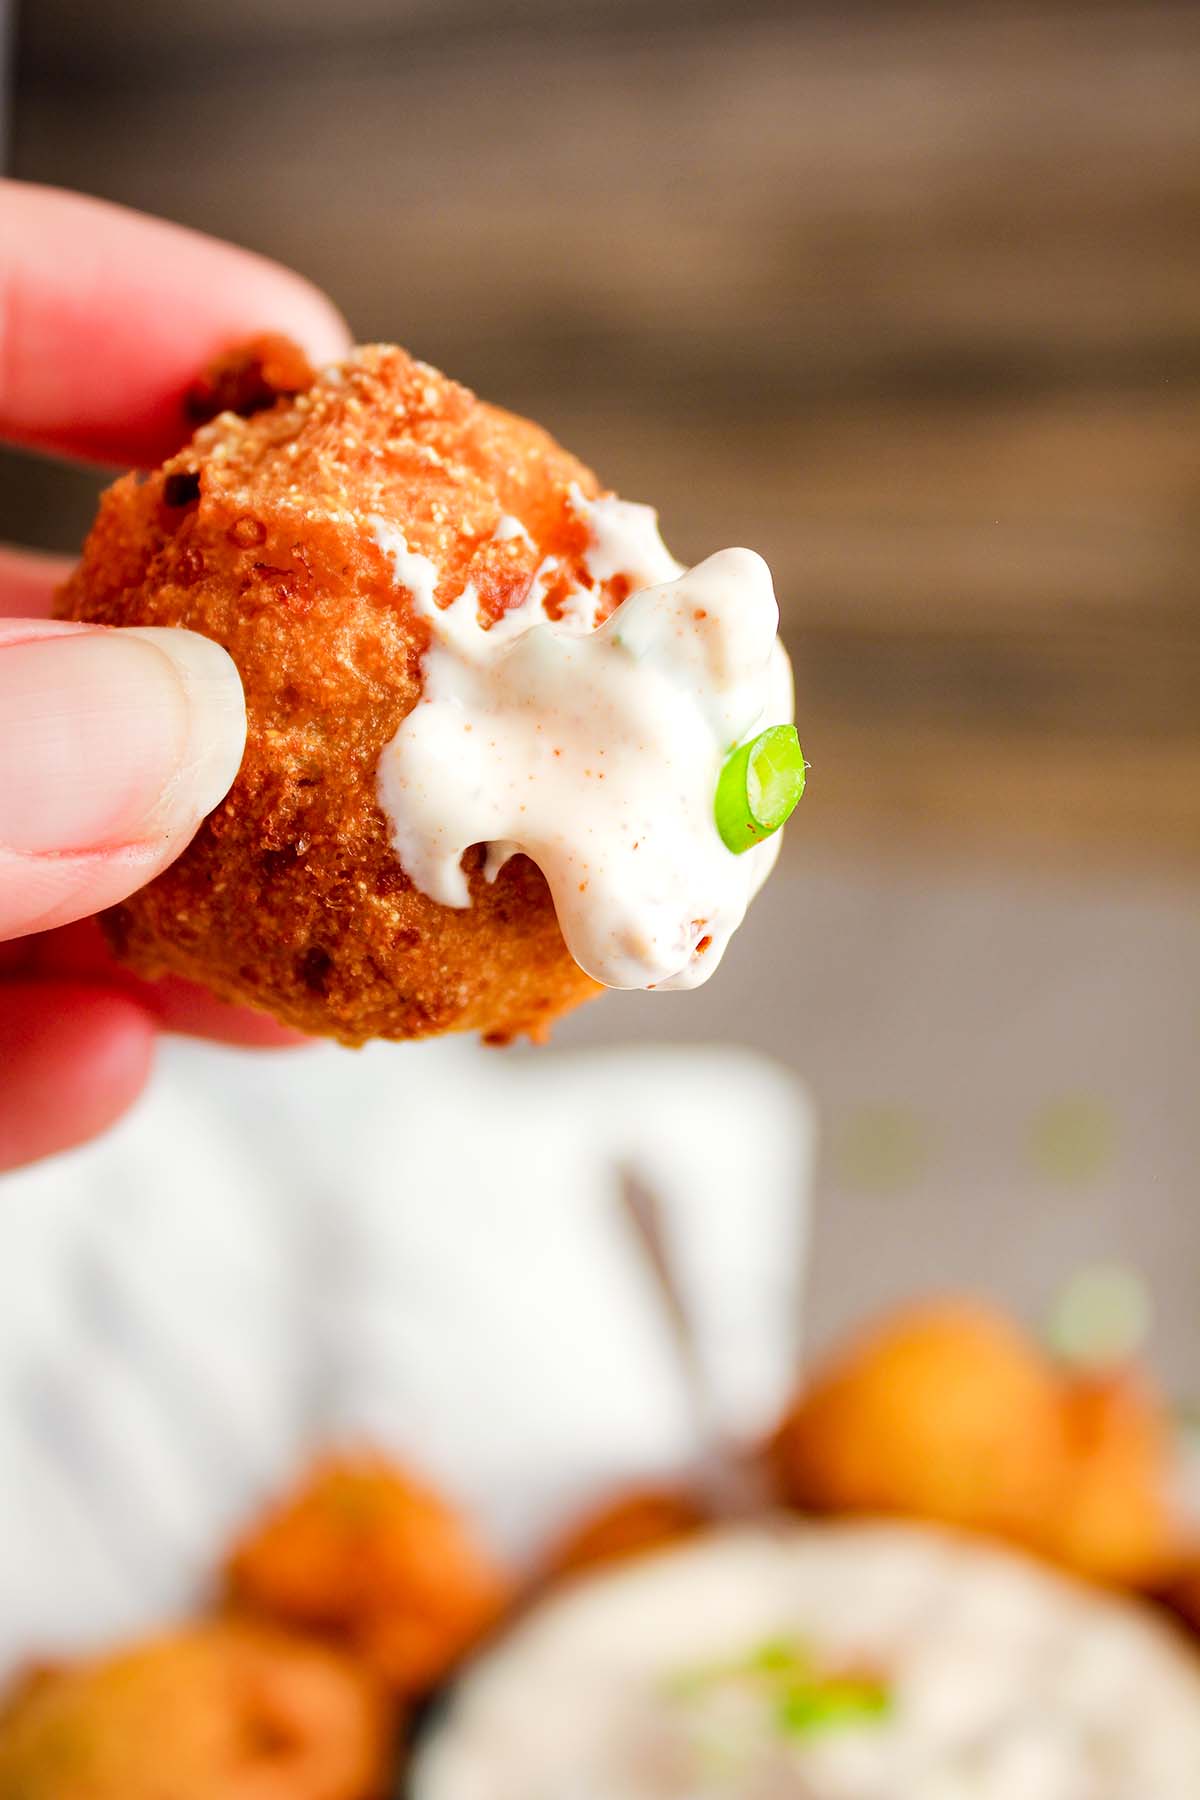 Hand holding hush puppy with Cajun dipping sauce